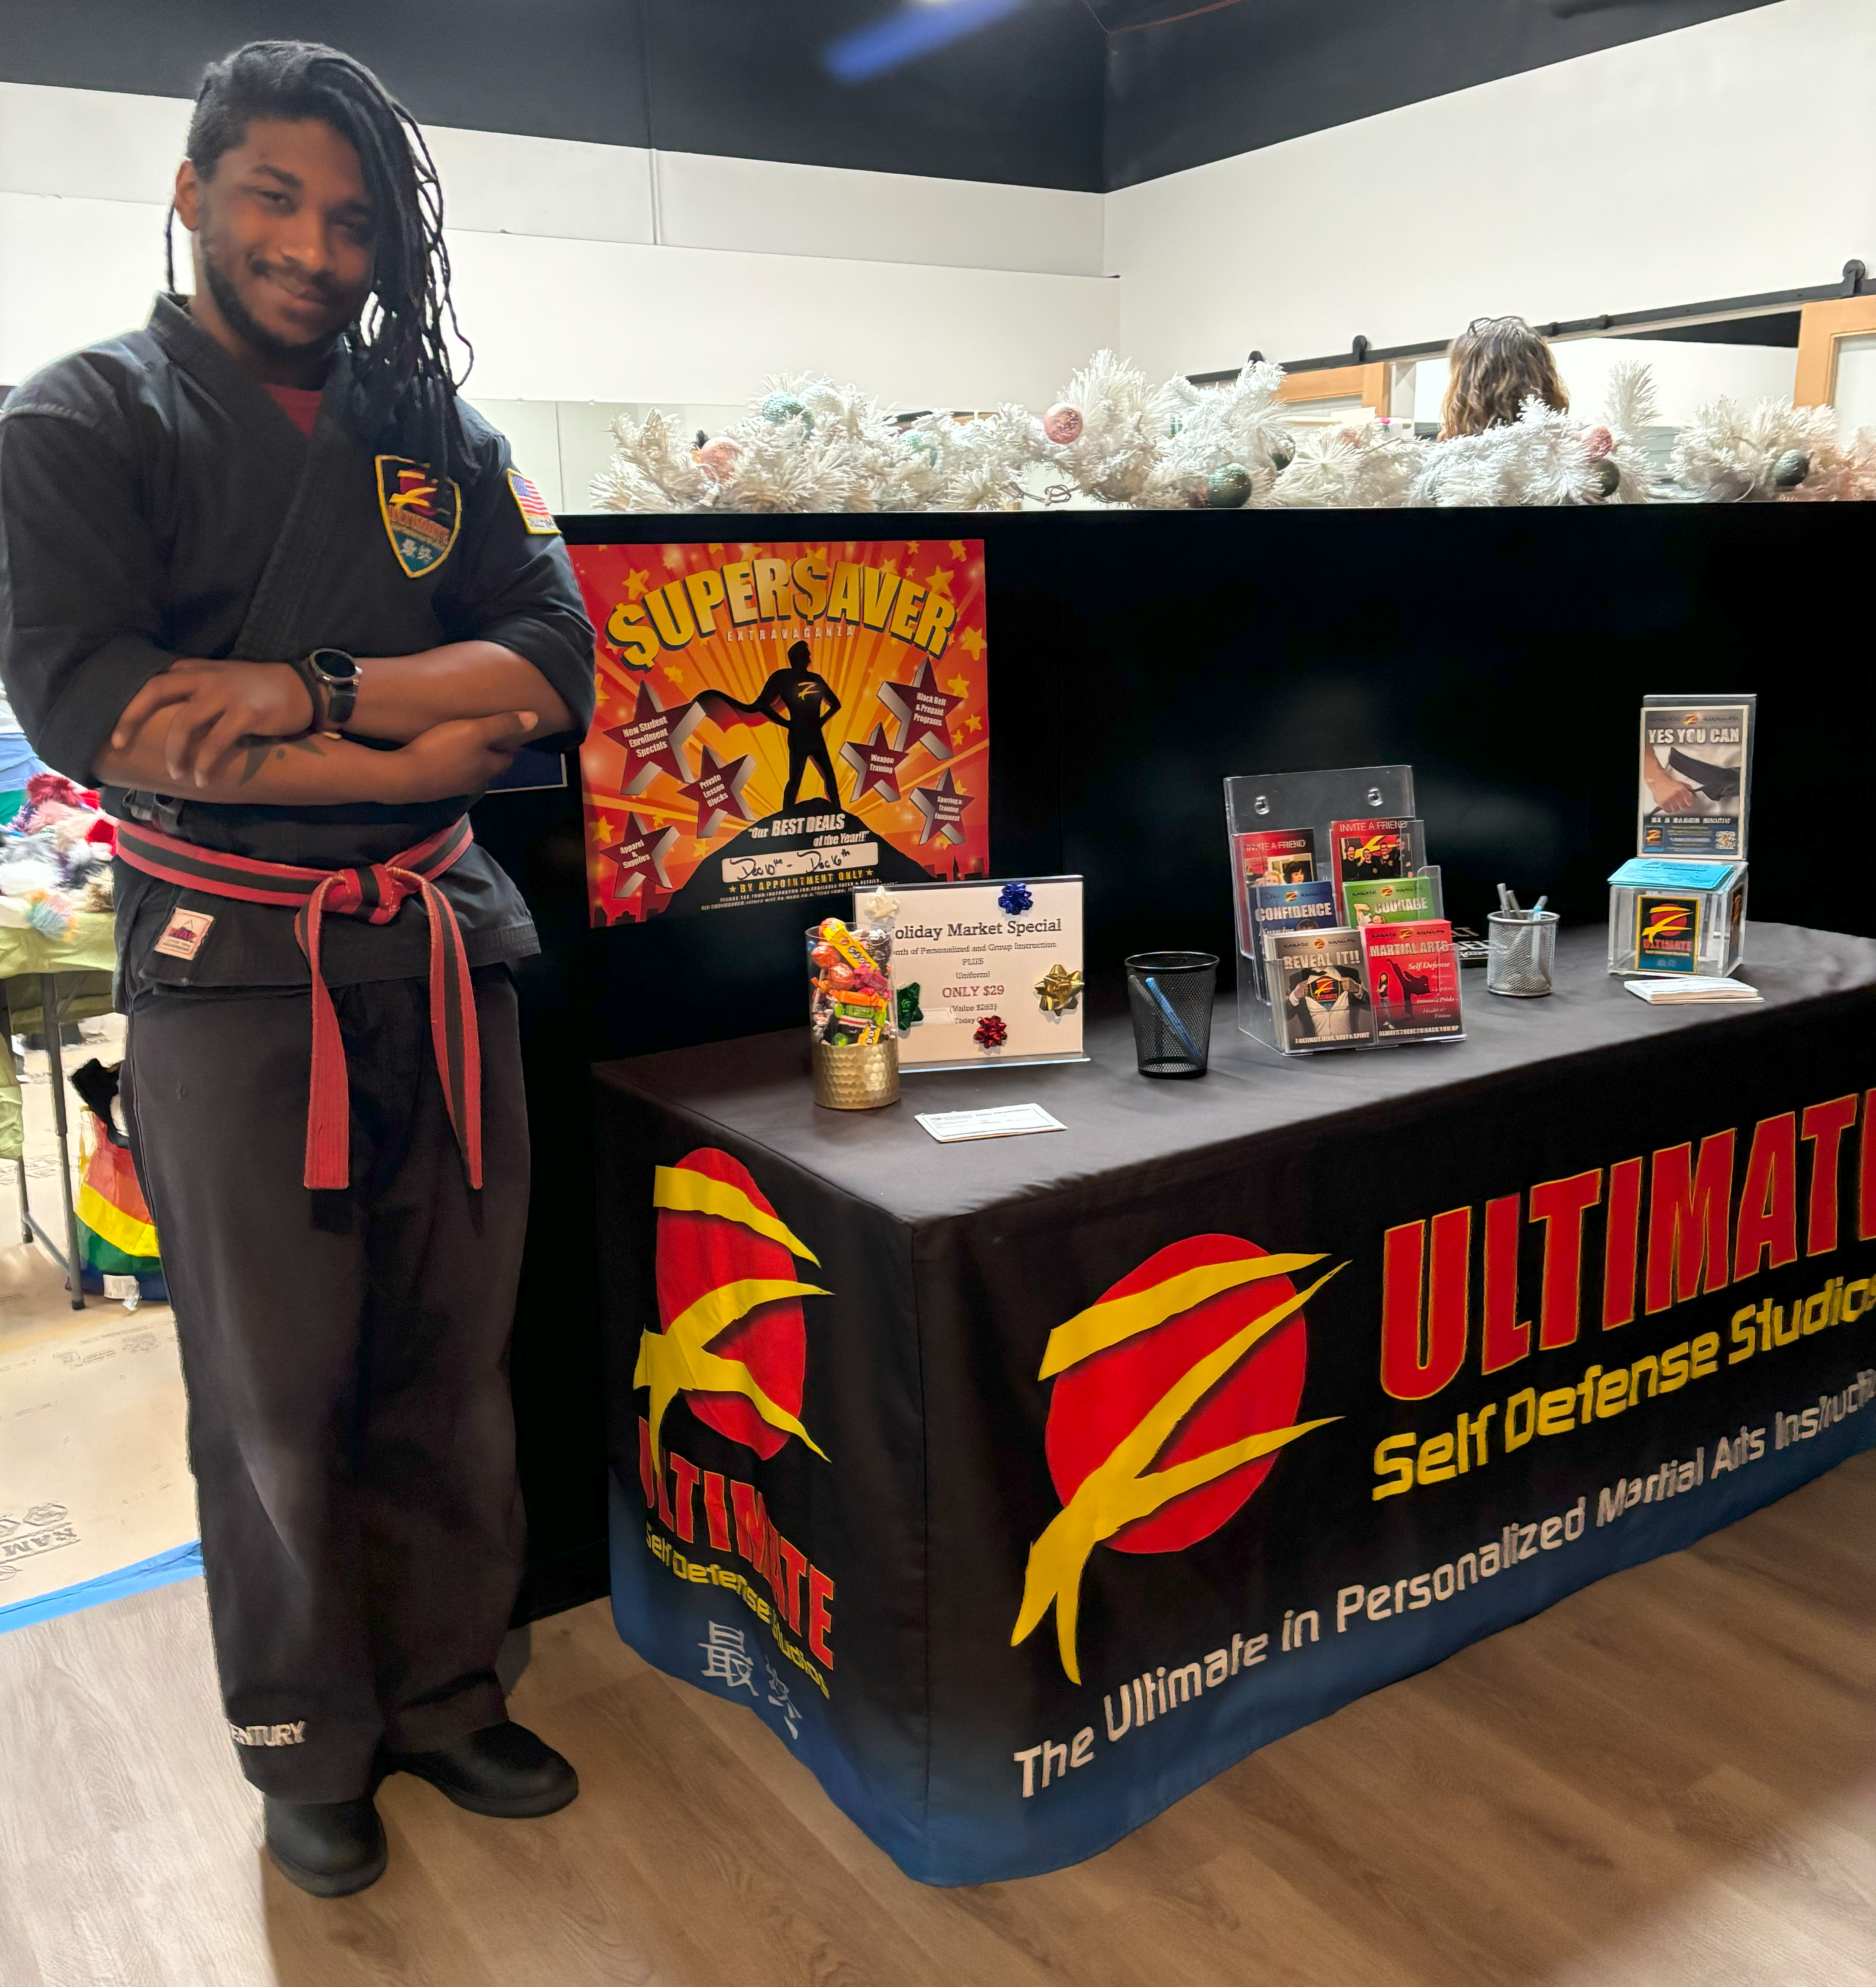 Person stands next to booth promoting our host's business z-ultimate self defense studio